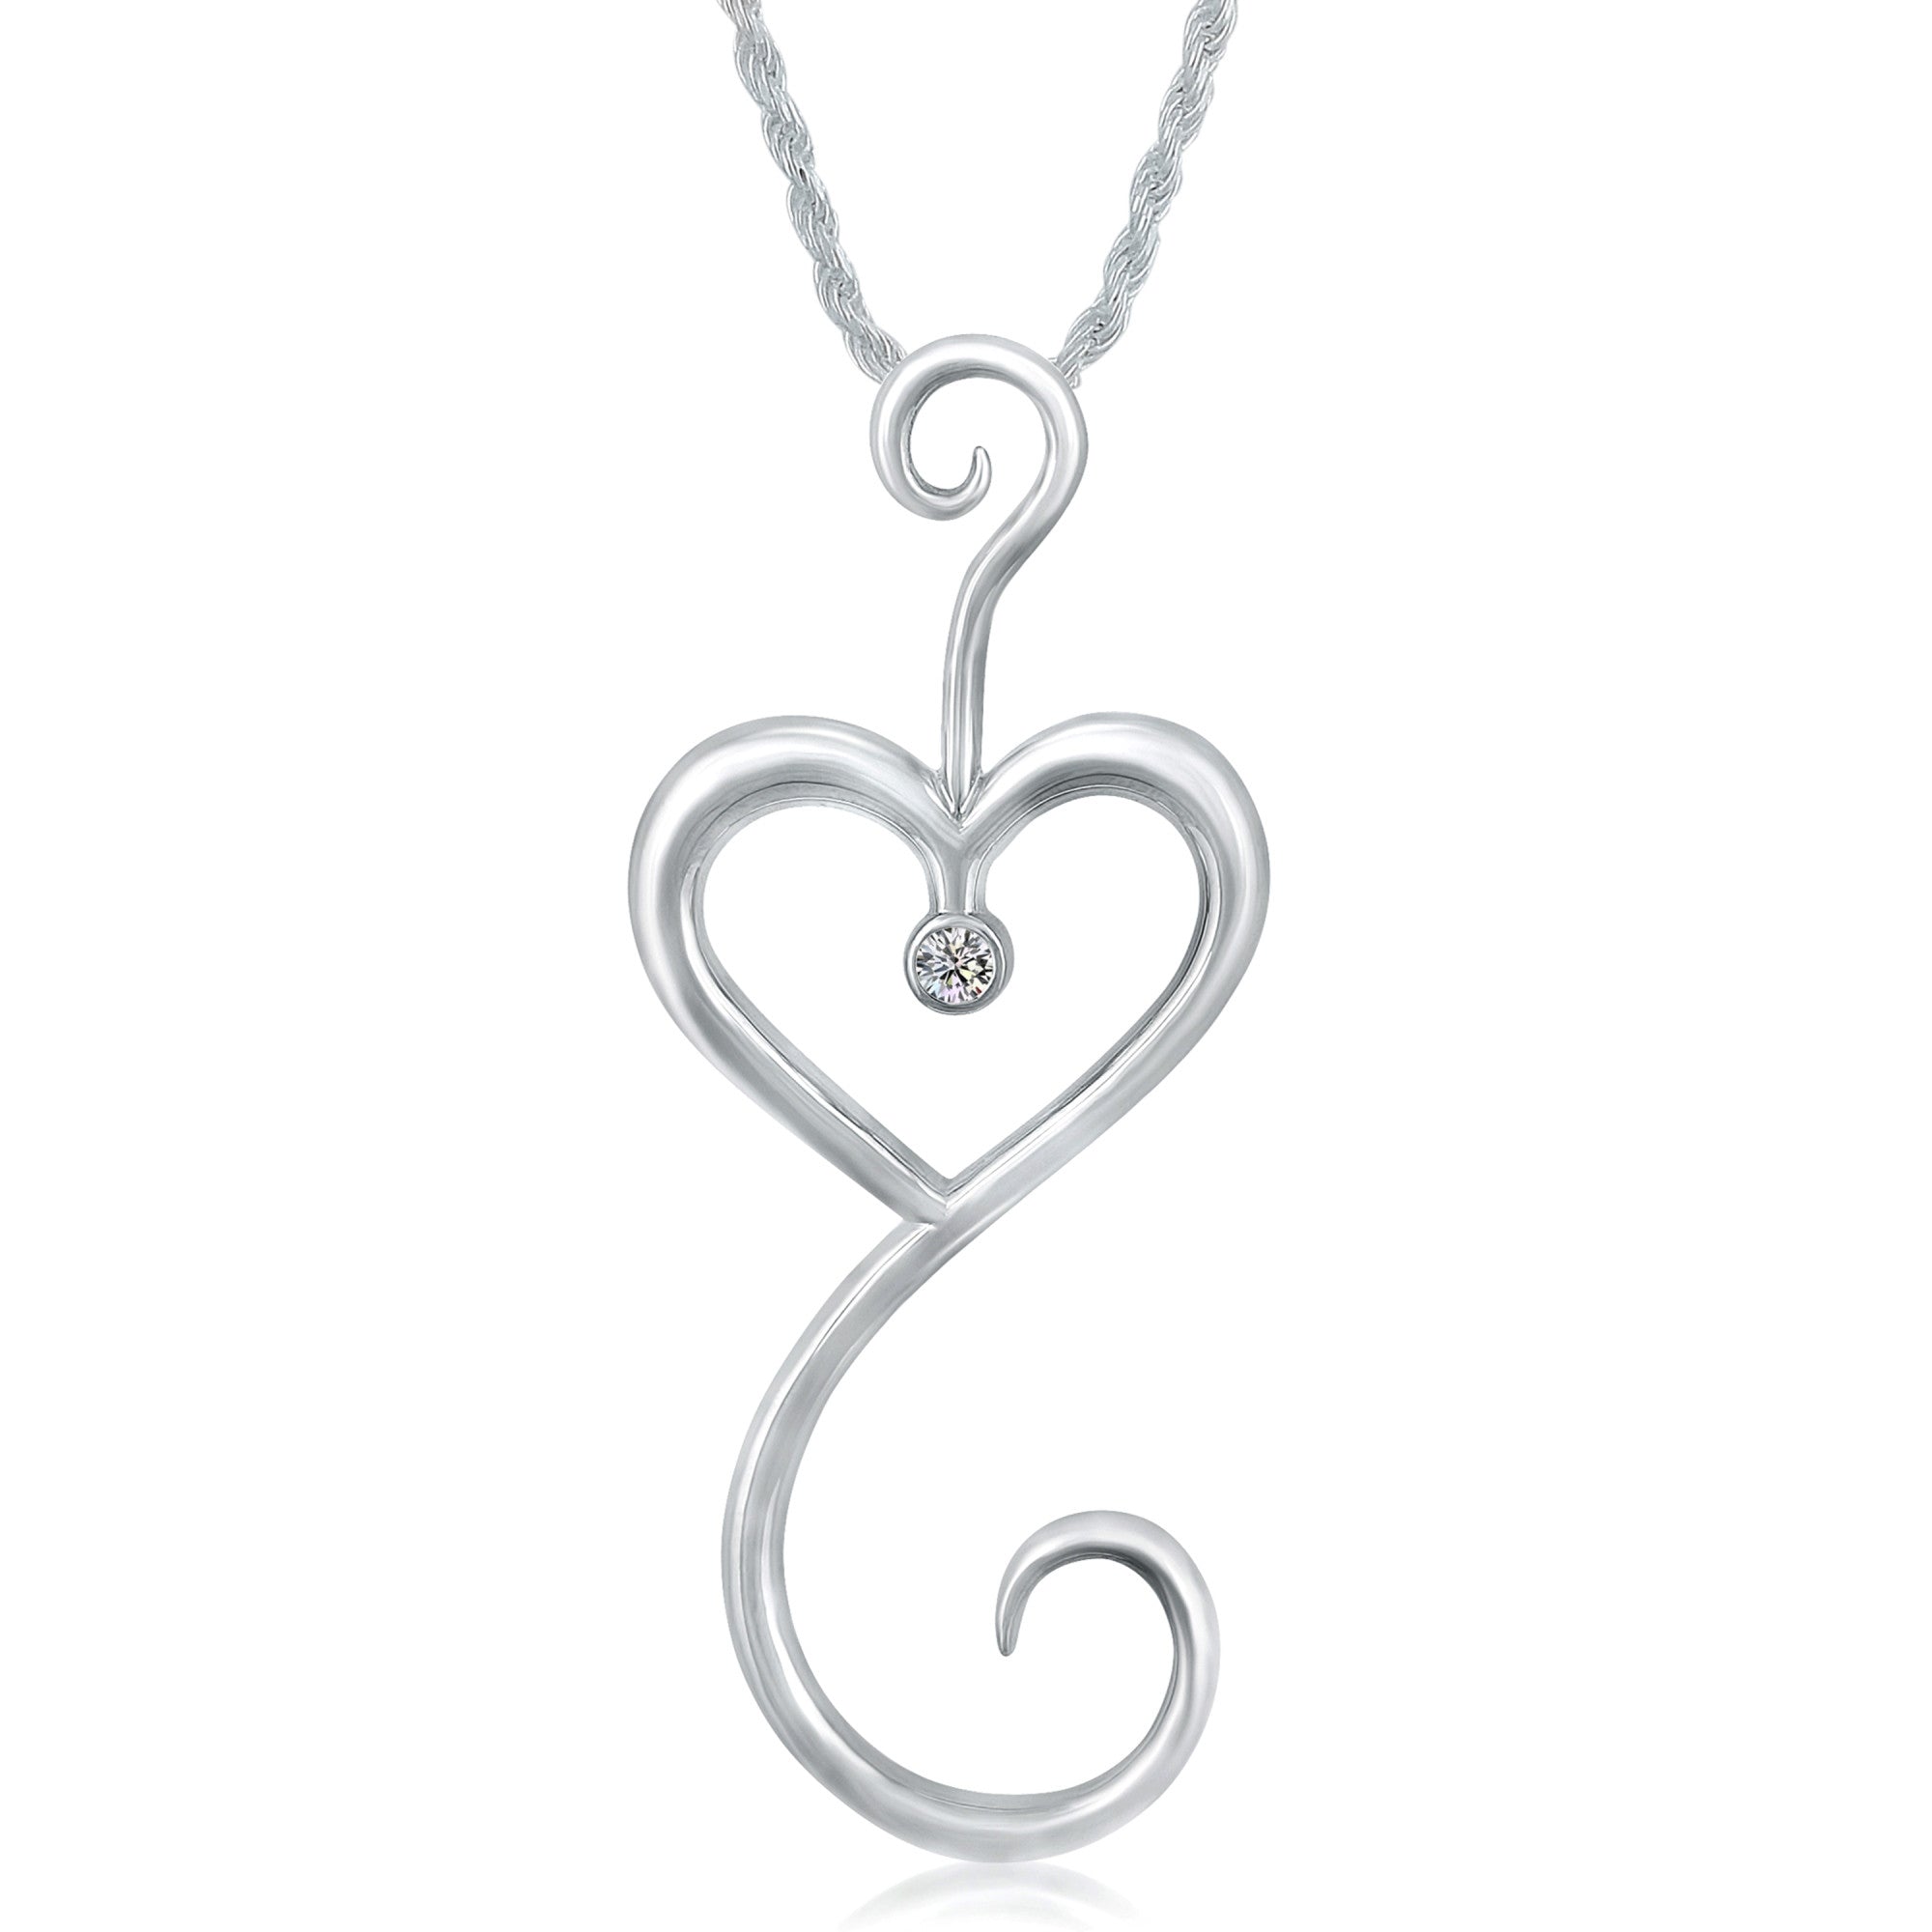 Intrikit Heart -Solid Sterling *Non Tarnish* Silver .925 with a 3mm White Sapphire Center Stone